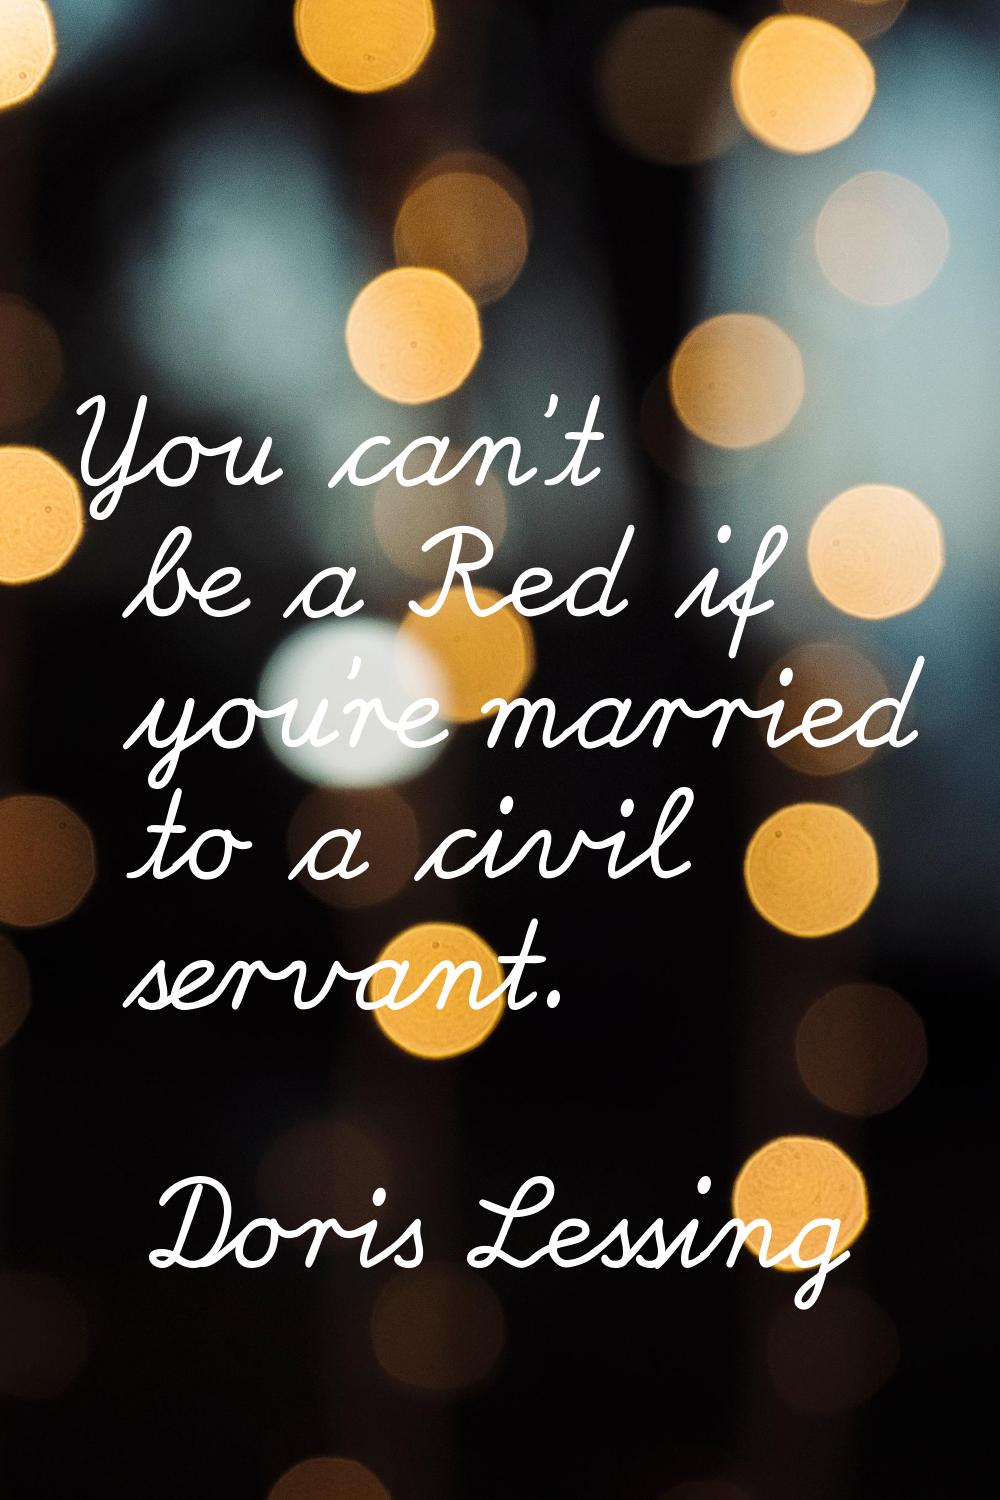 You can't be a Red if you're married to a civil servant.